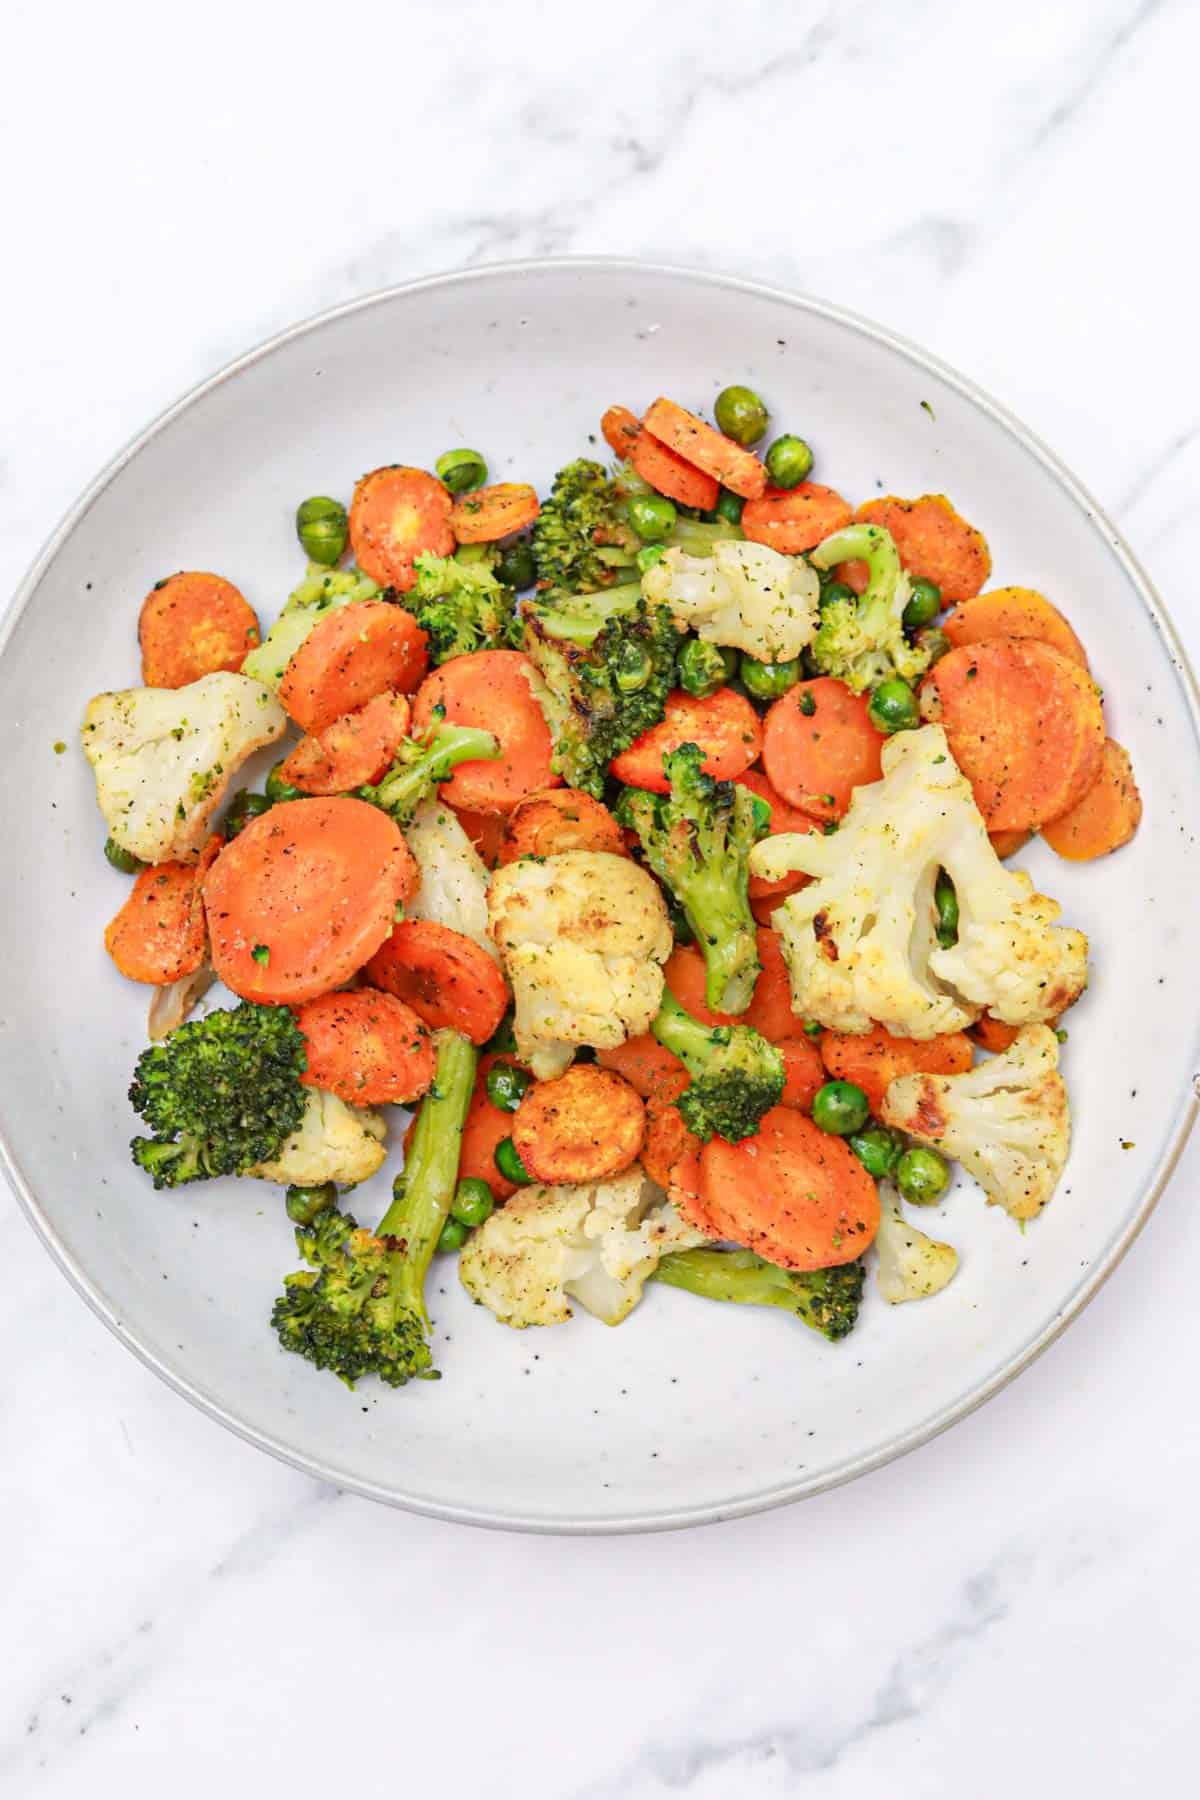 roasted frozen vegetables served on a plate.